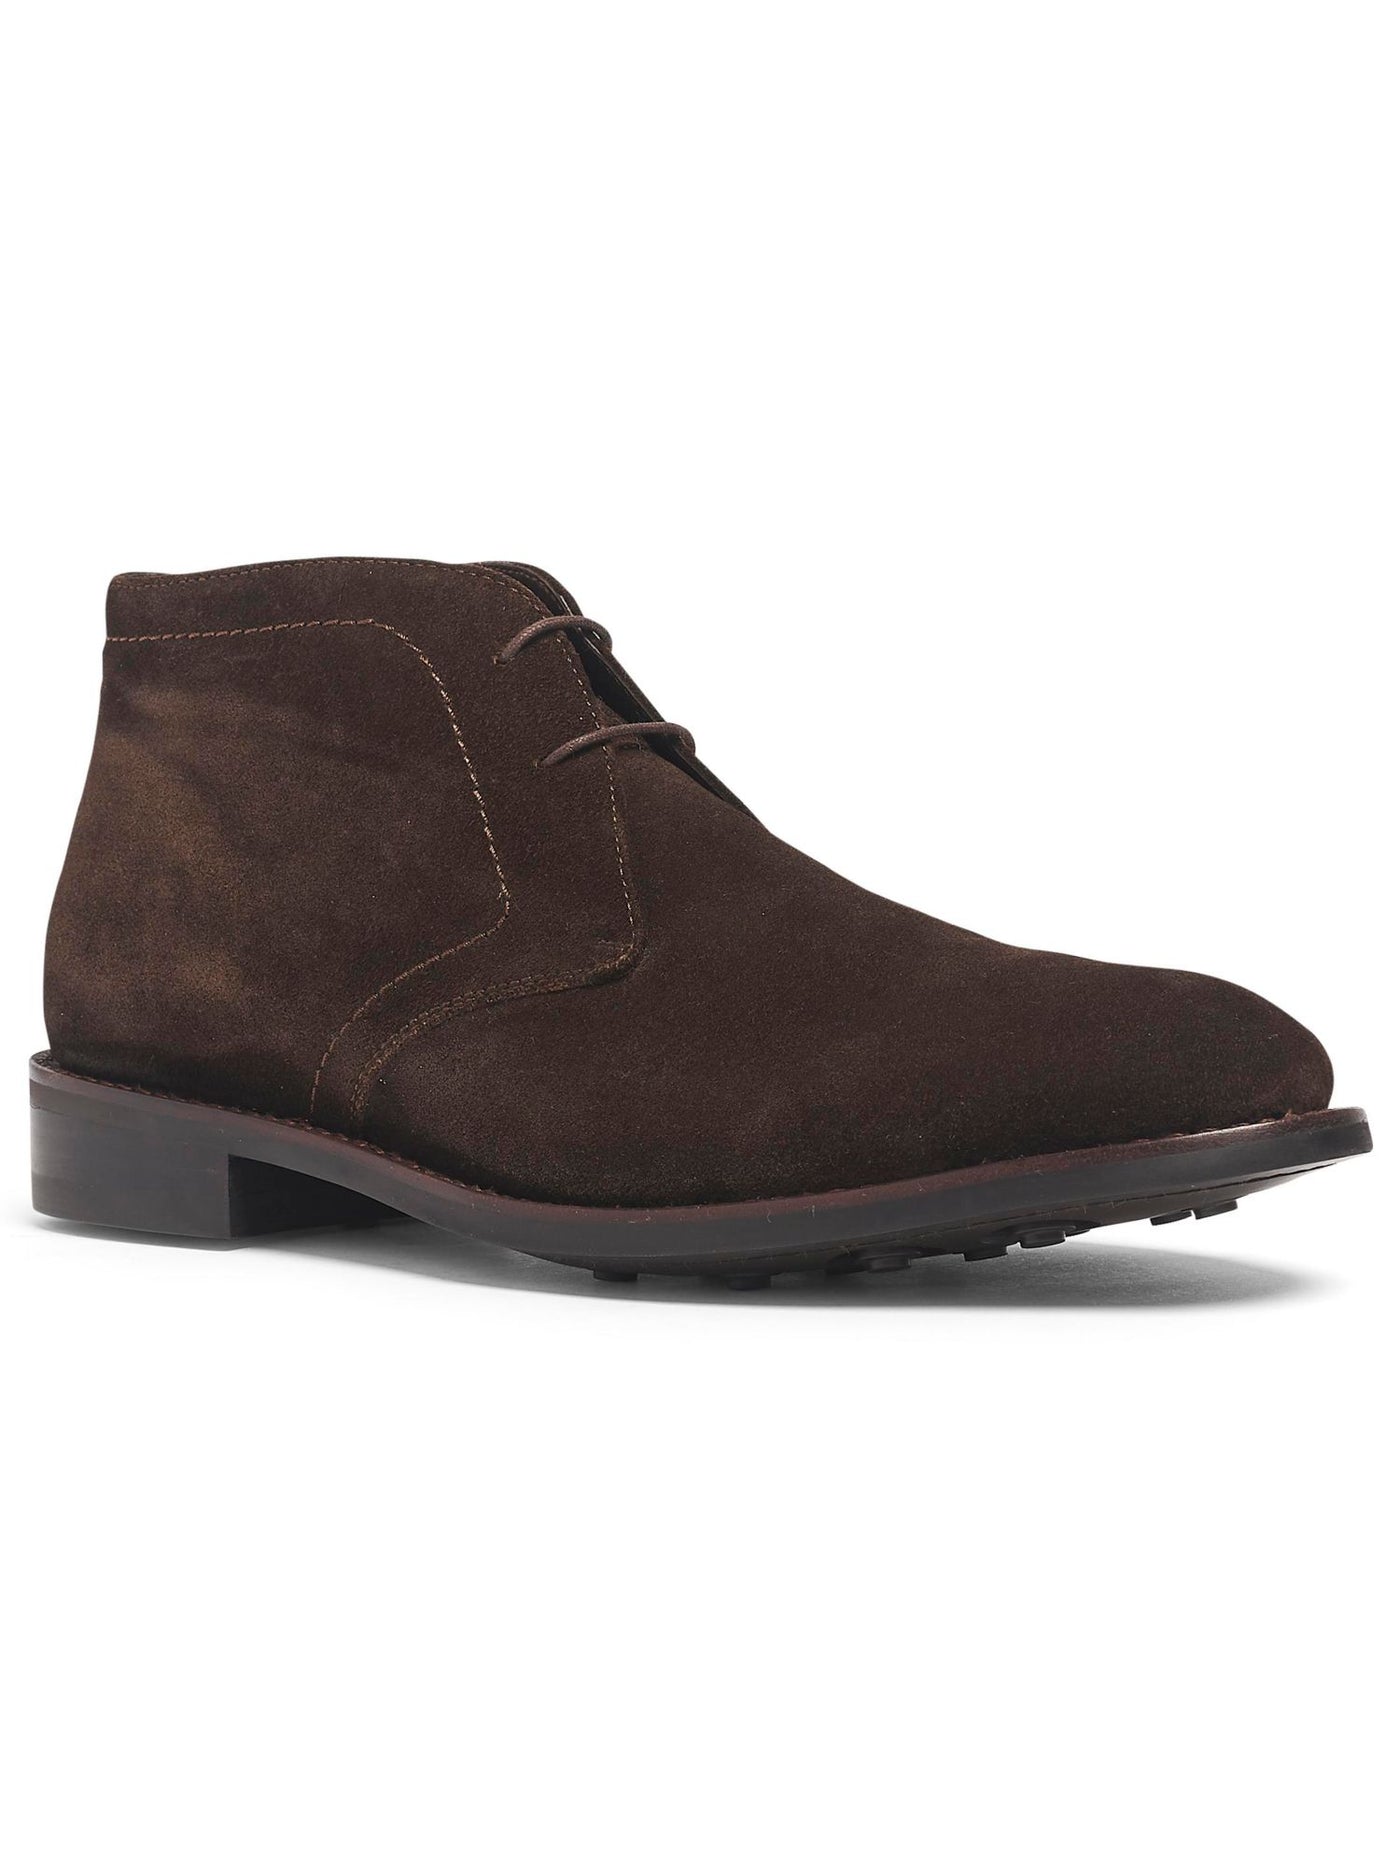 ANTHONY VEER ESSENTIALS Mens Brown Cushioned Wilson Almond Toe Lace-Up Leather Chukka Boots 10.5